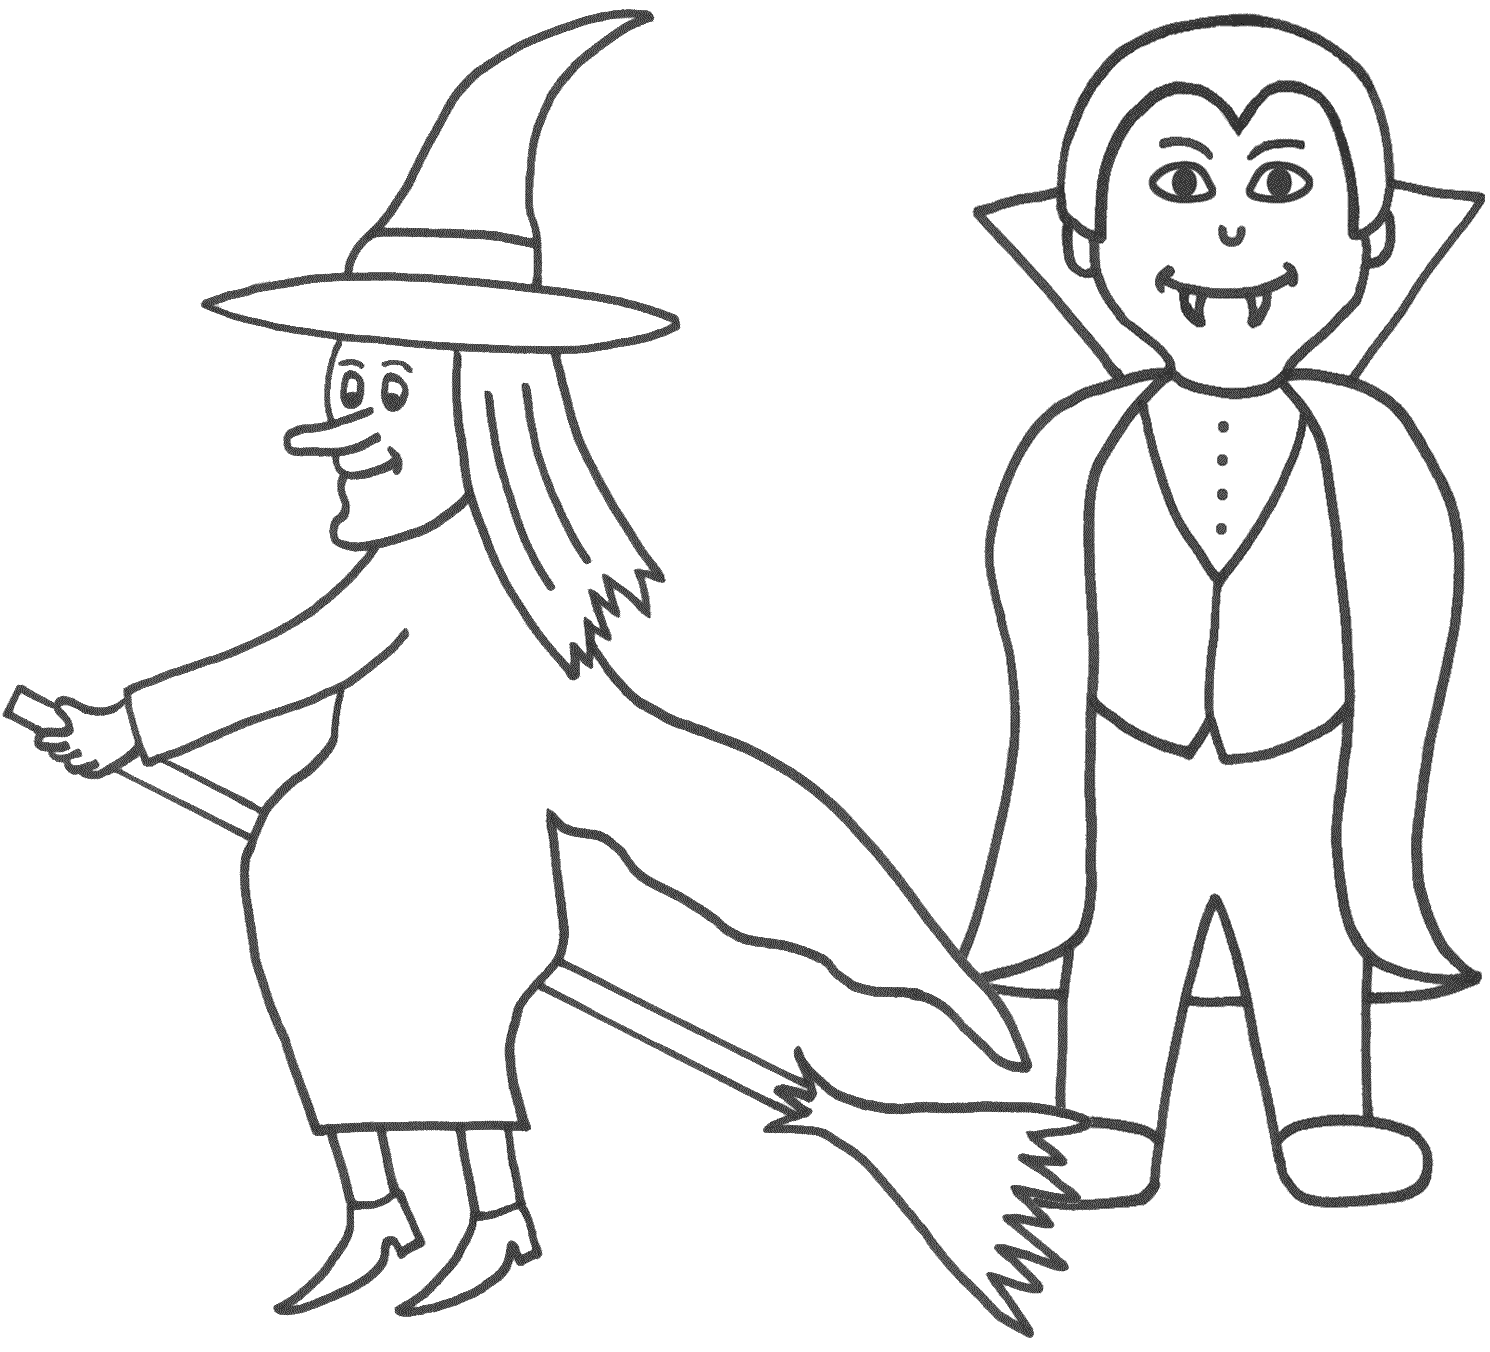 Vampire Coloring Book Pages | Coloring Pages